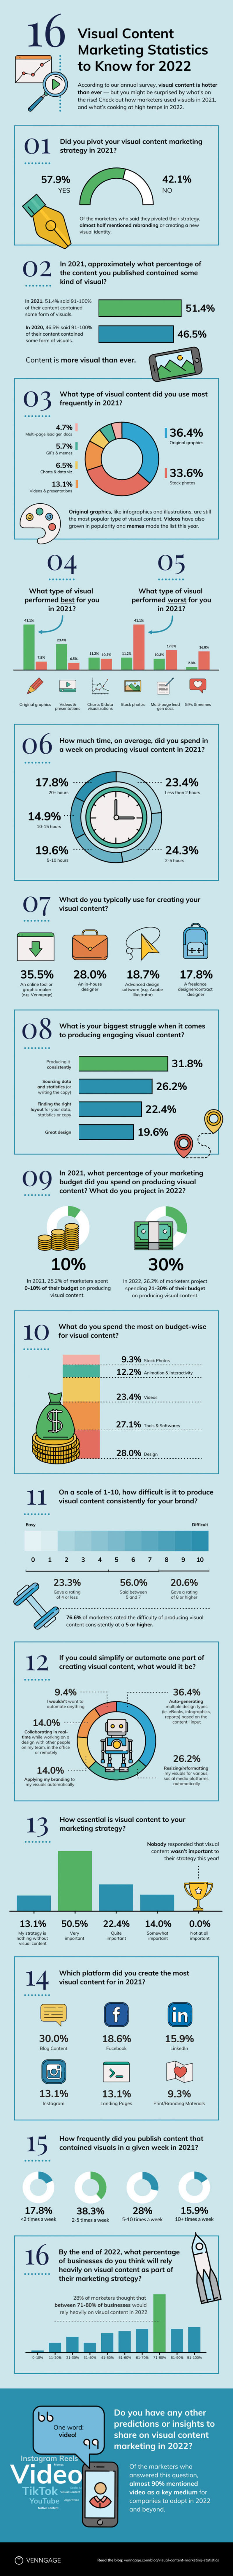 Visual Content Marketing Statistics to Know for 2022